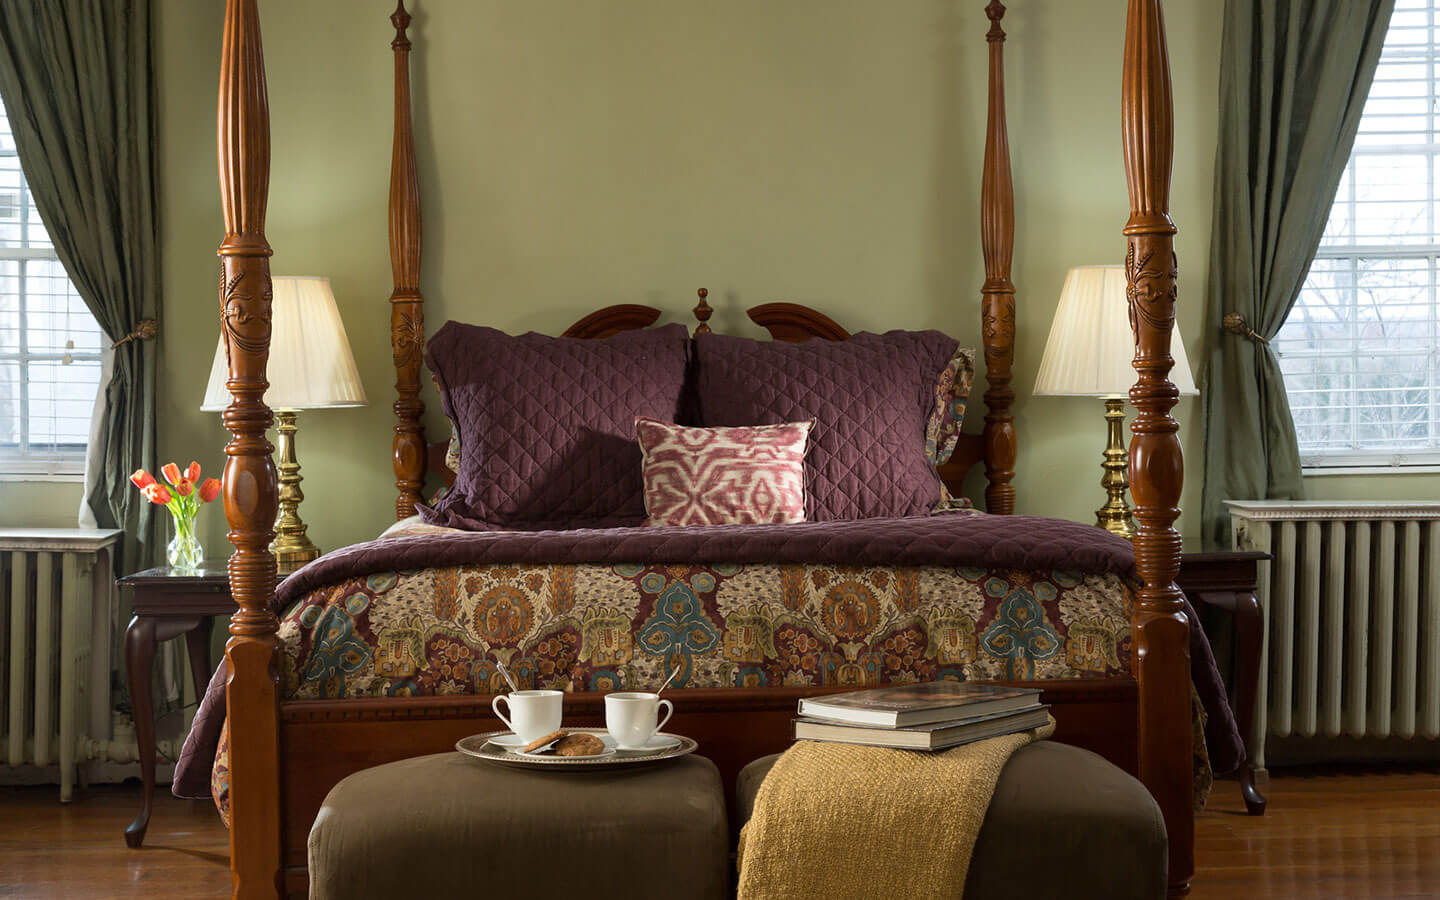 Enjoy luxury accommodations and exceptional service at our bed and breakfast near Orange, VA